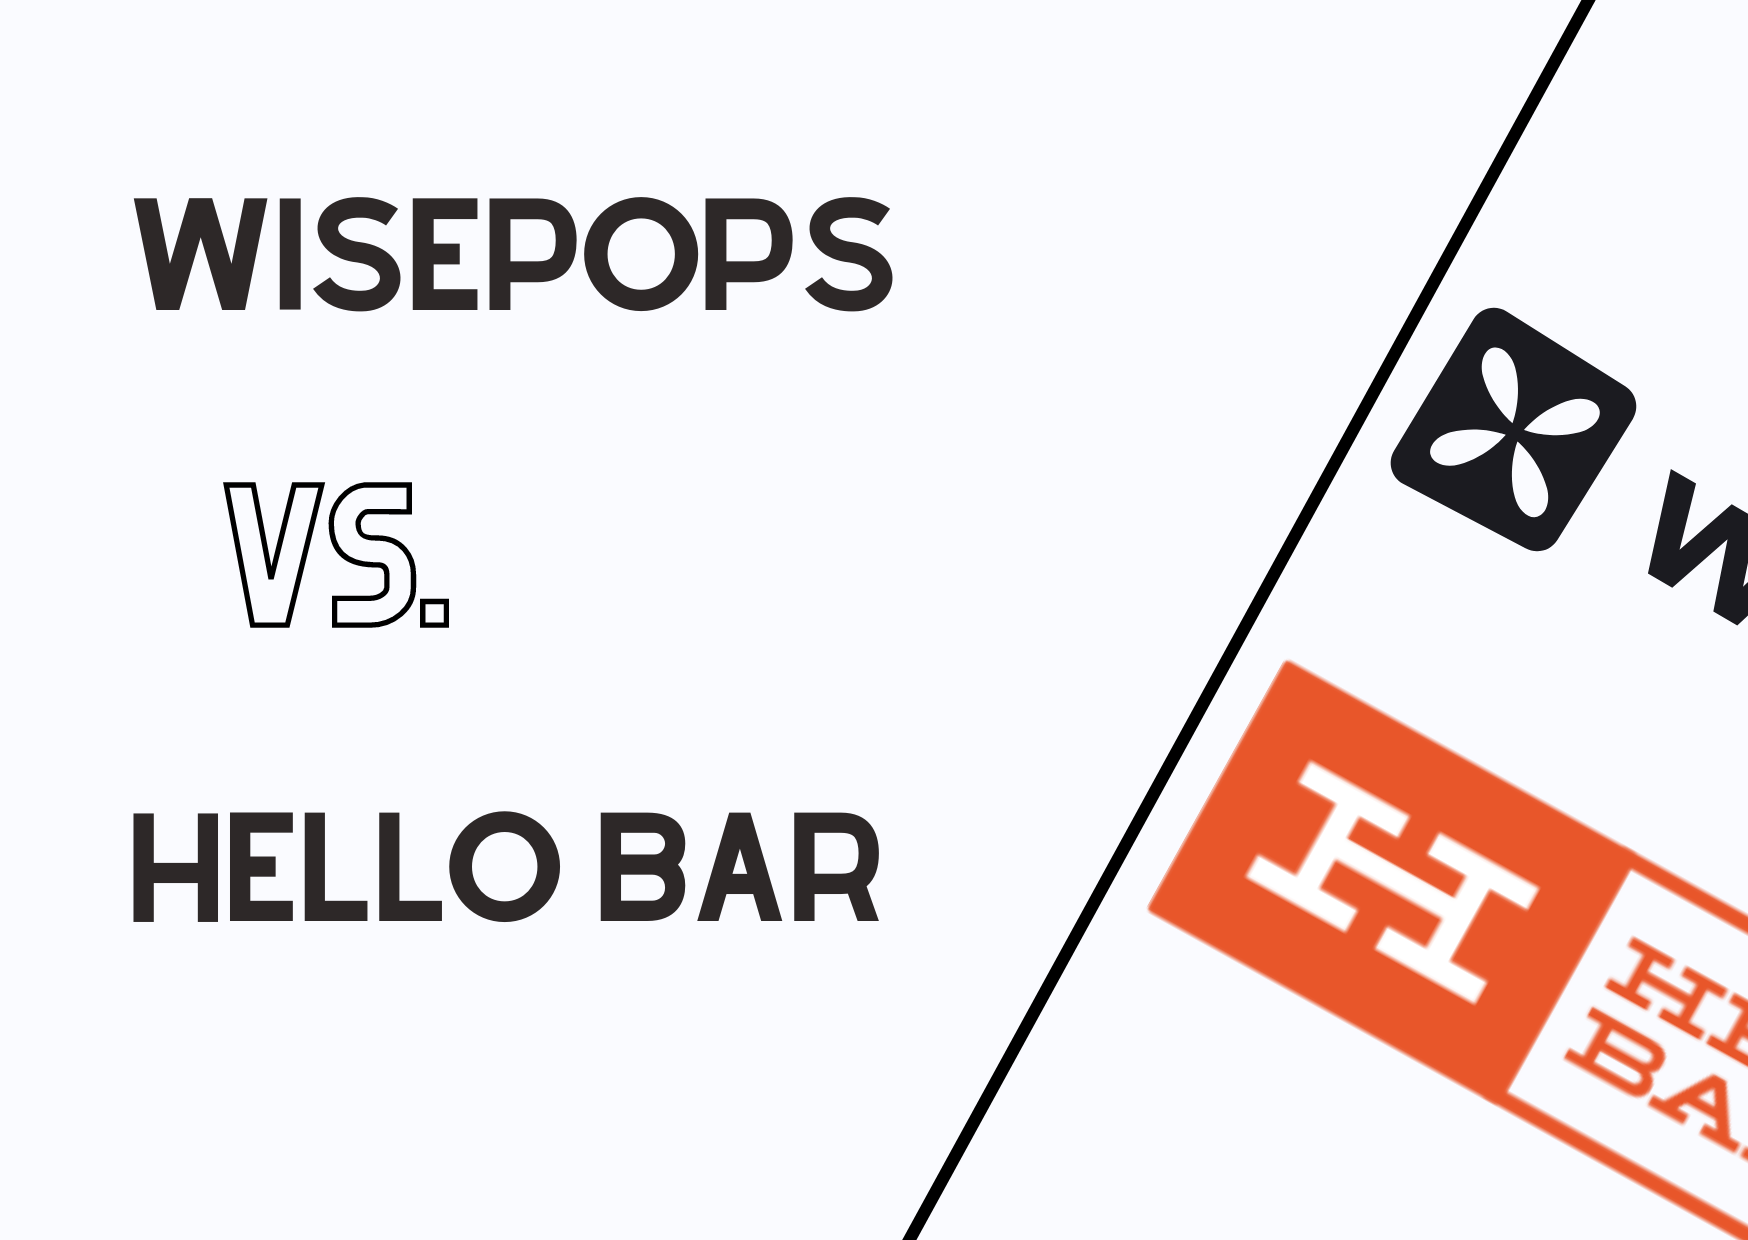 the banner of Wisepops and Hello Bar to compare and contrast the features